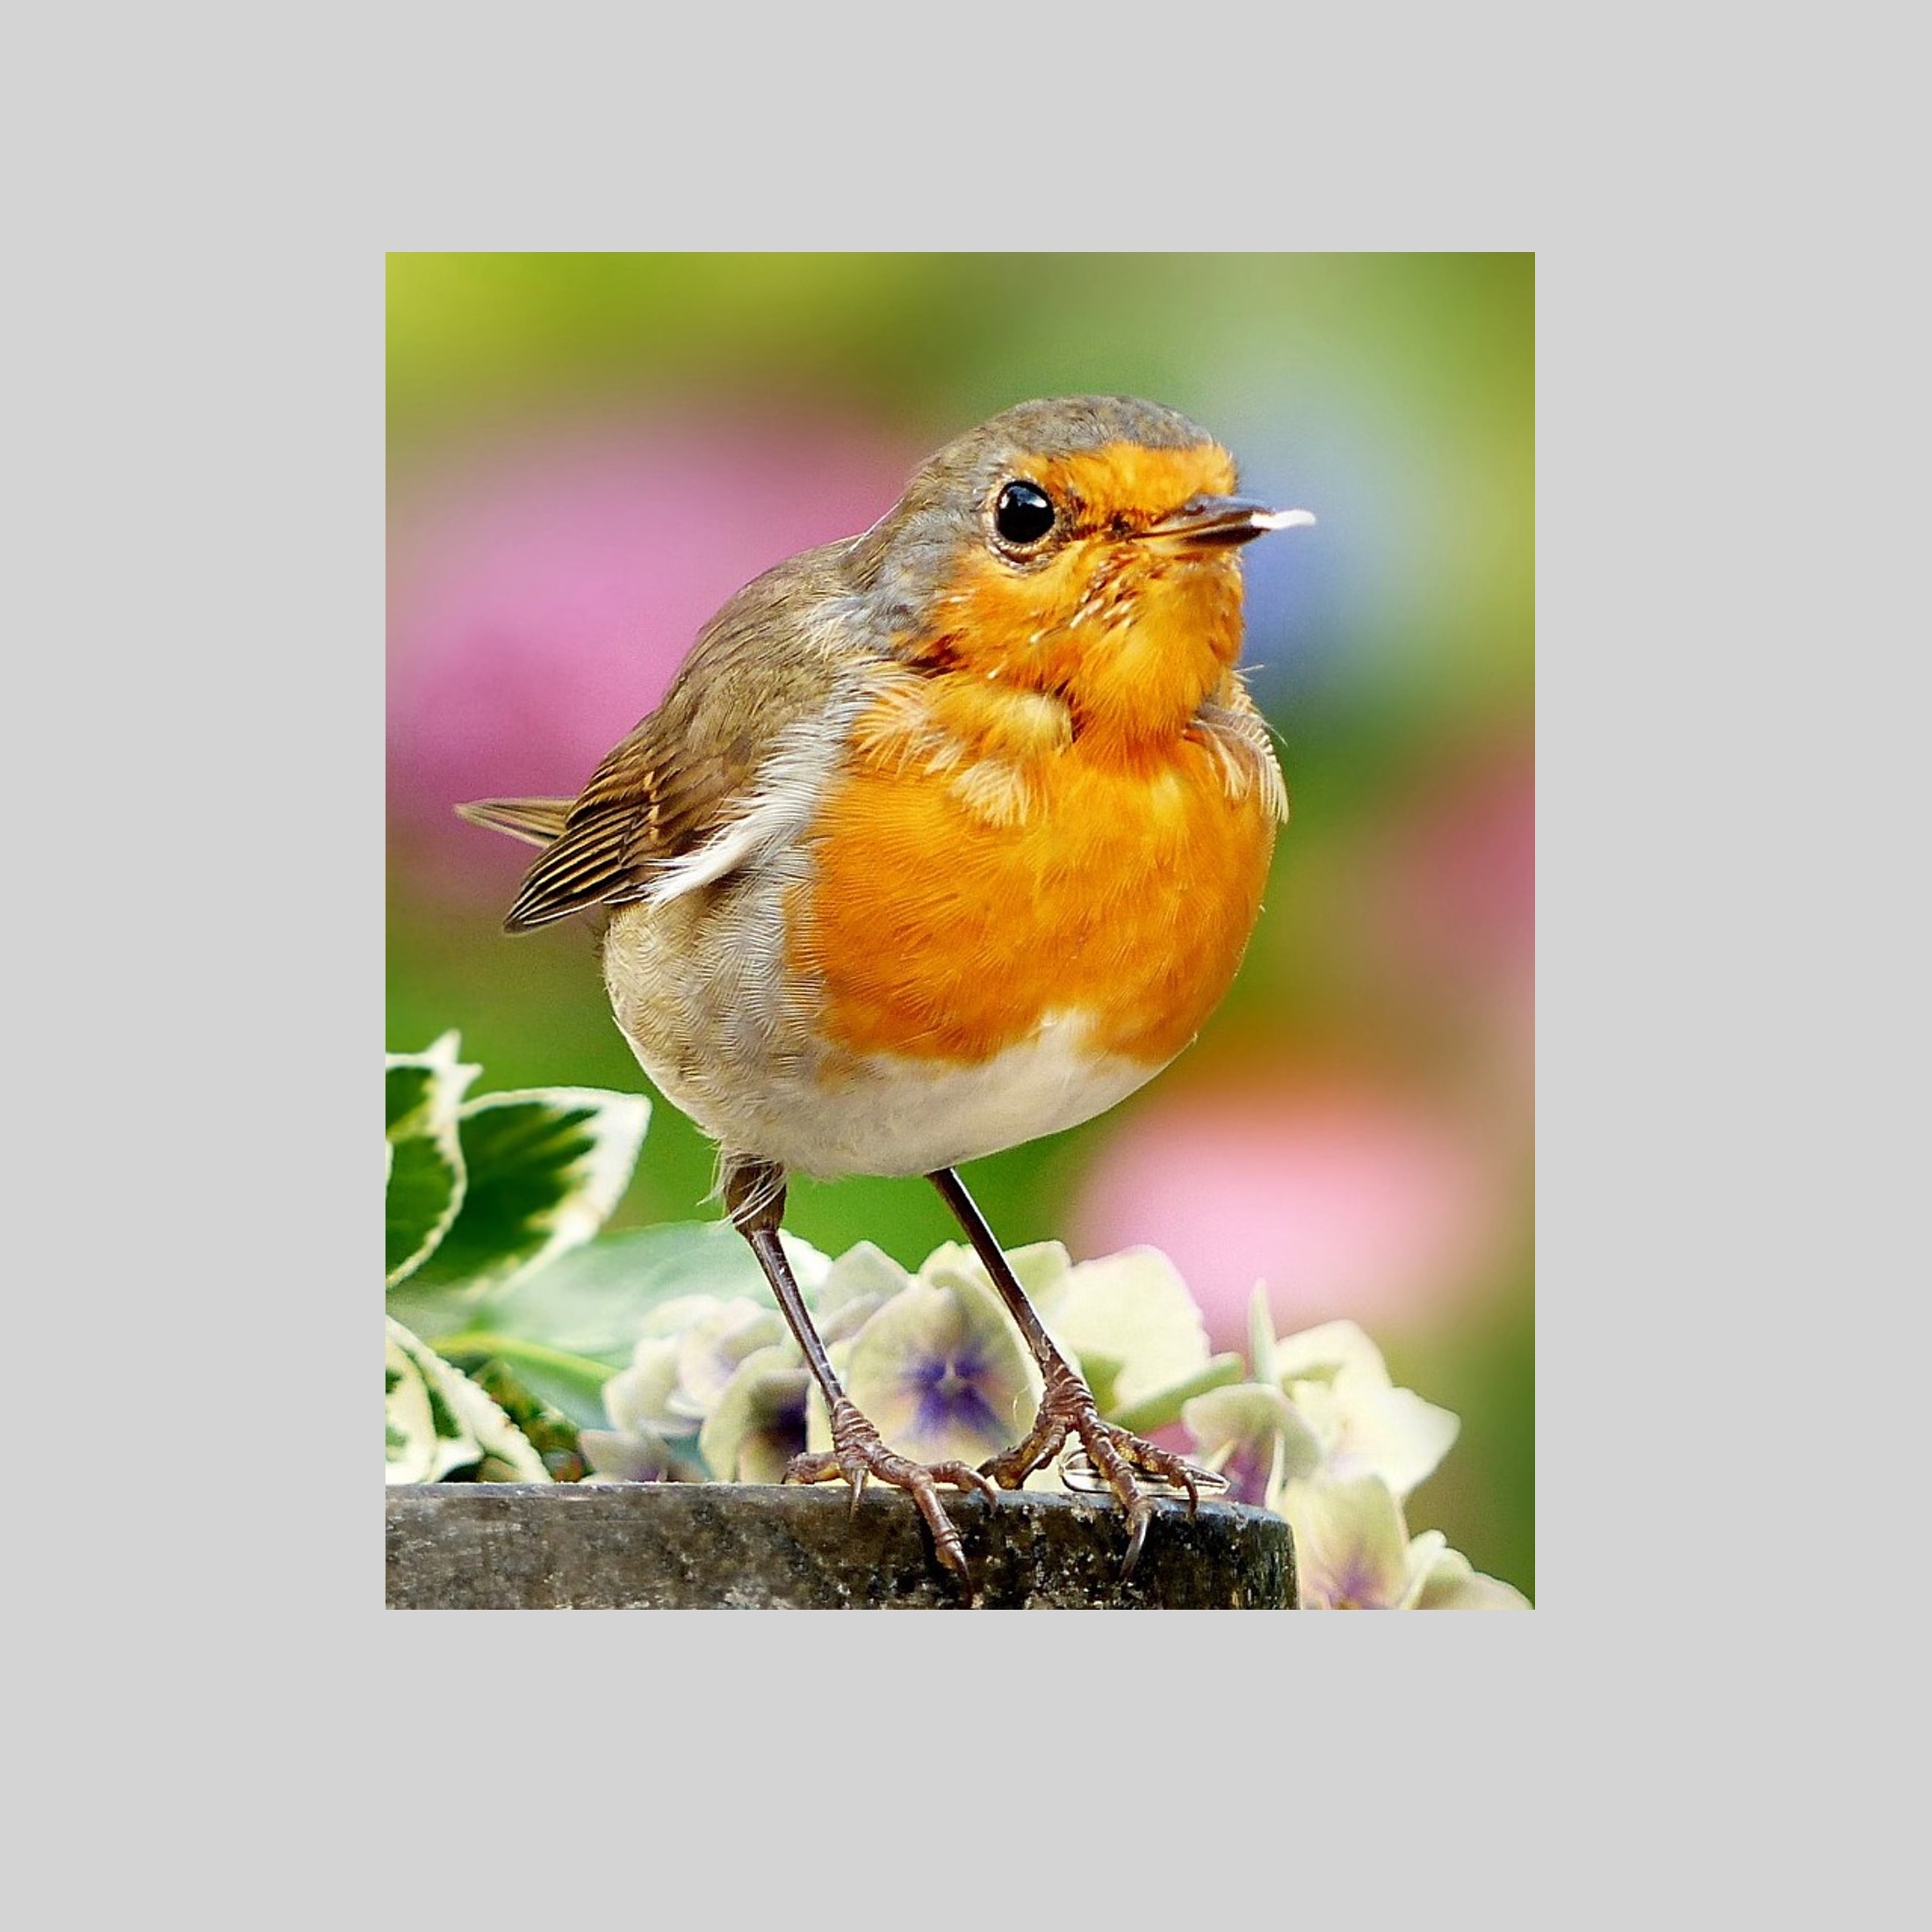 Robins – online tuition